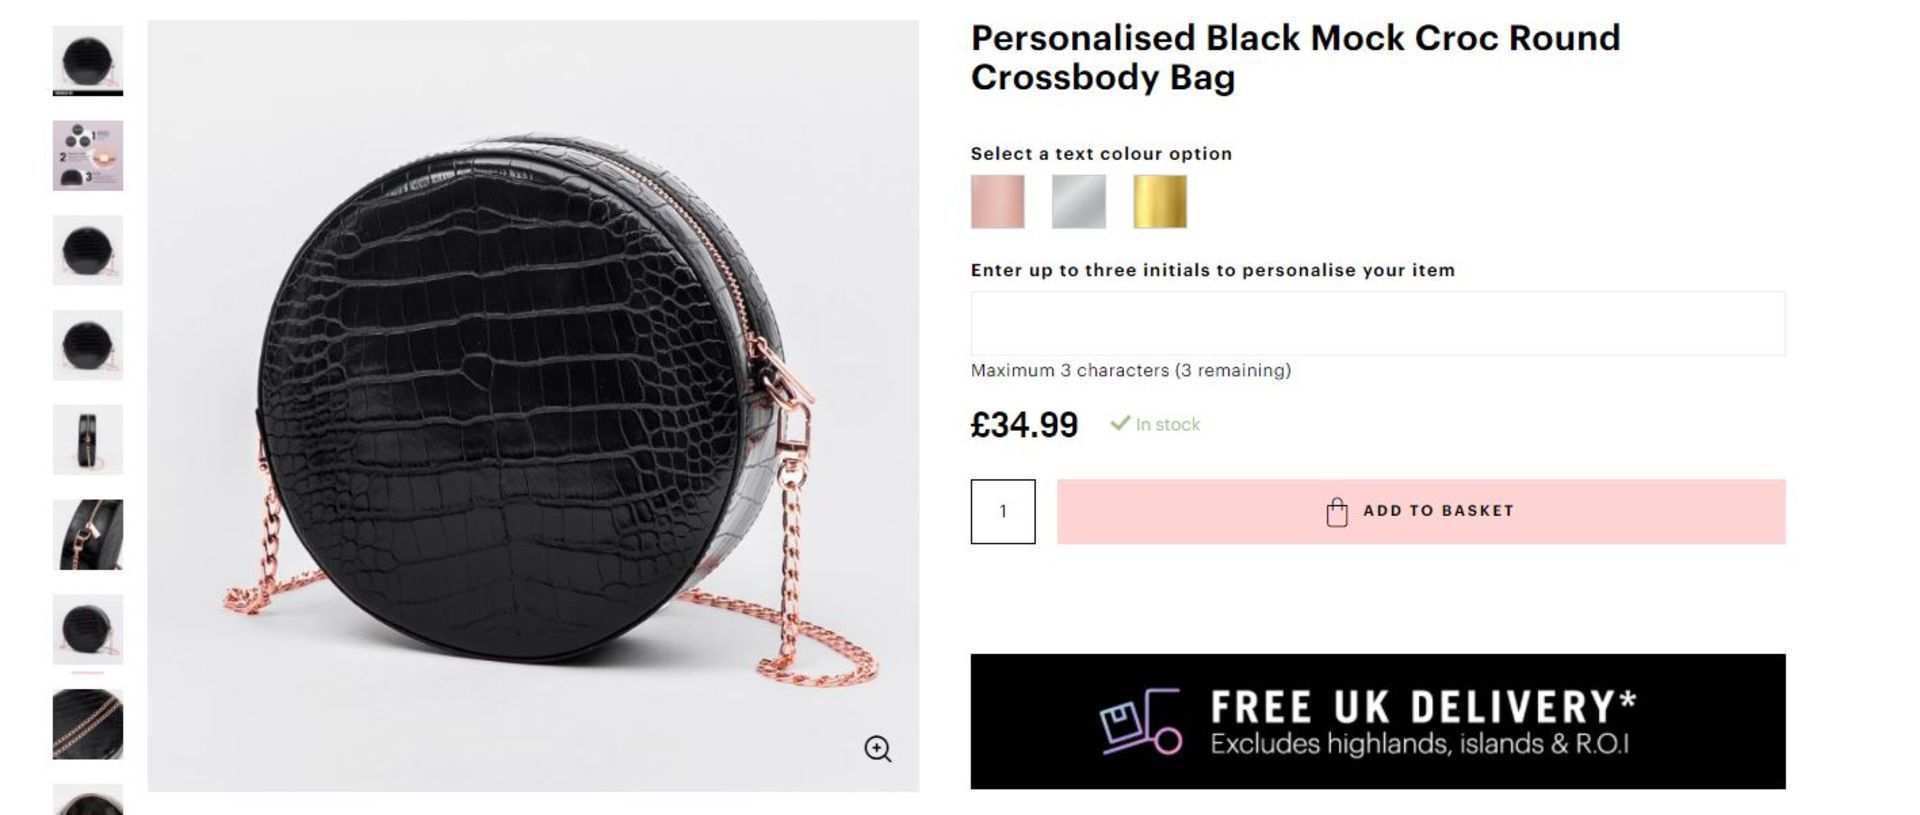 5 x NEW BOXED Beauti Mock Croc Round Crossbody Luxury Bag -Black. RRP £34.99 each. NOTE: ITEM IS NOT - Image 2 of 2